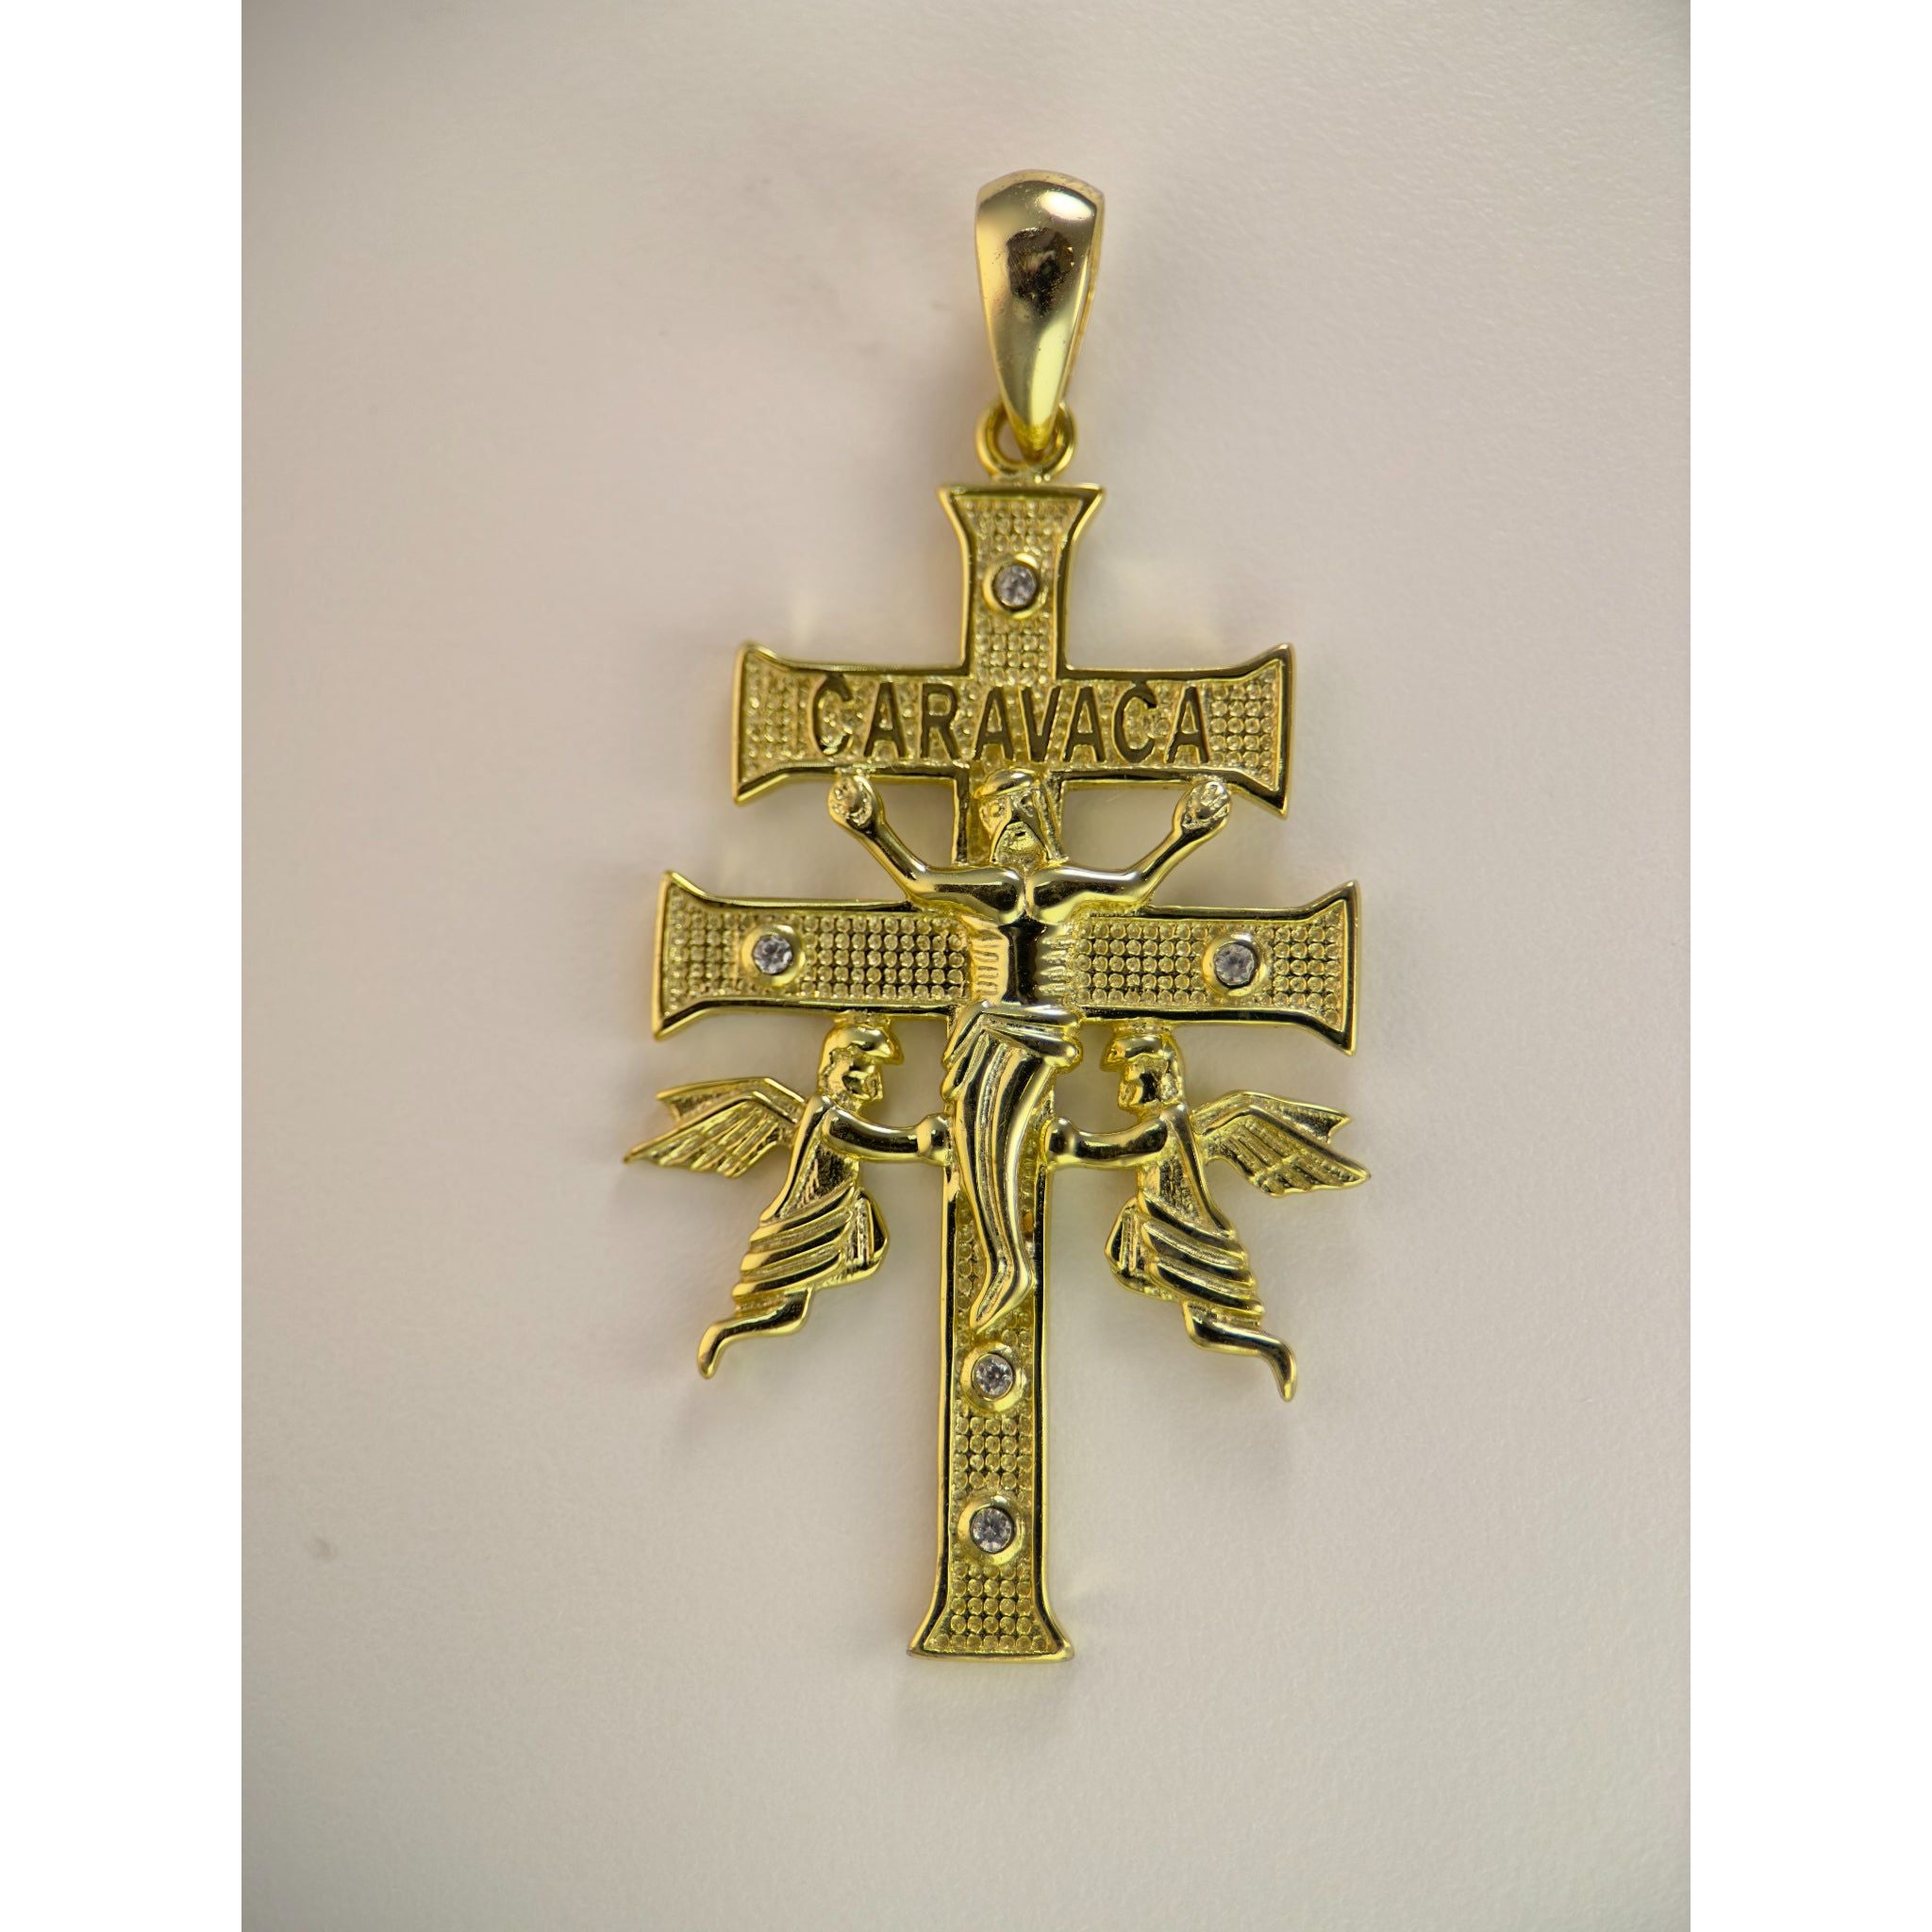 DR3166 - 925 Sterling Silver,14k Gold Bonded - Lab Created Stones - Pendant - Crucifix w/Angels Pendant